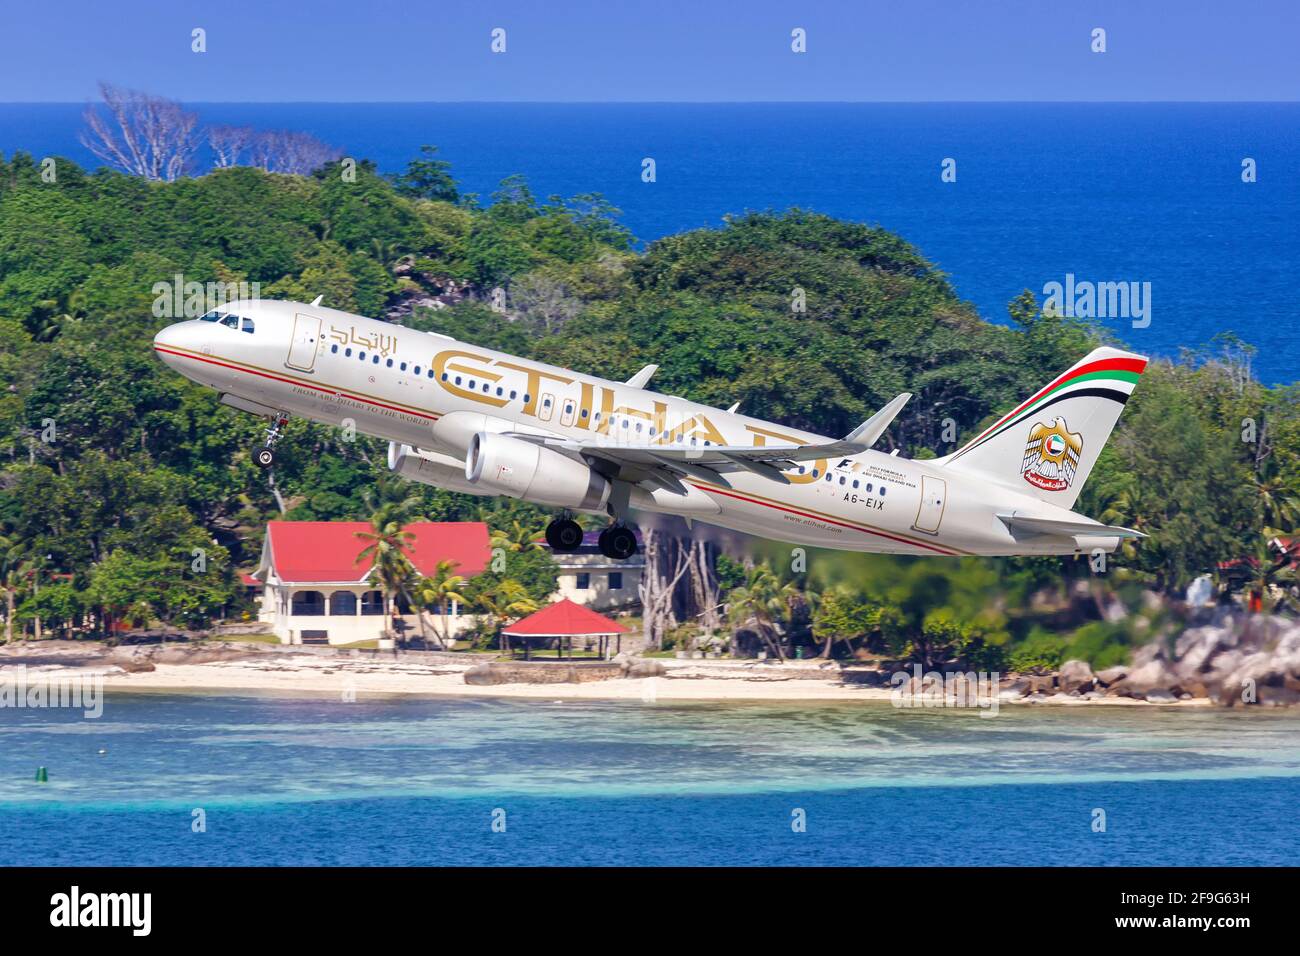 Mahe, Seychelles - November 24, 2017: Etihad Airways Airbus A320 airplane at Seychelles International Airport (SEZ) in the Seychelles. Airbus is a Eur Stock Photo